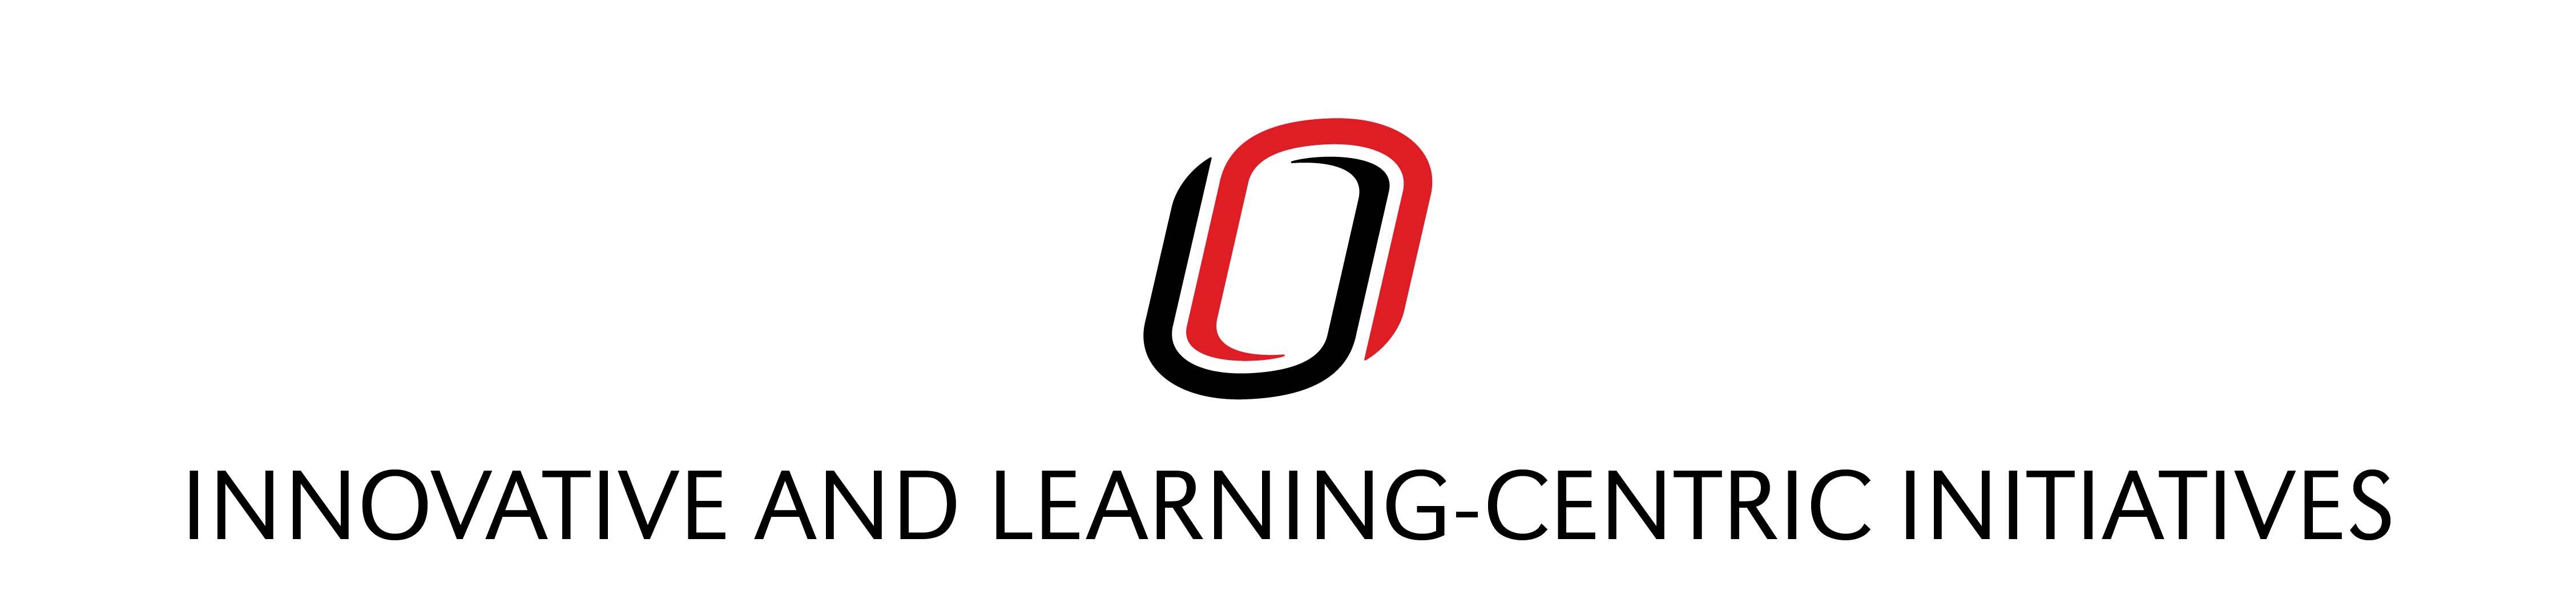 UNO icon in full color (red, black) above the title of the office (Innovative and Learning-Centric Initiatives)